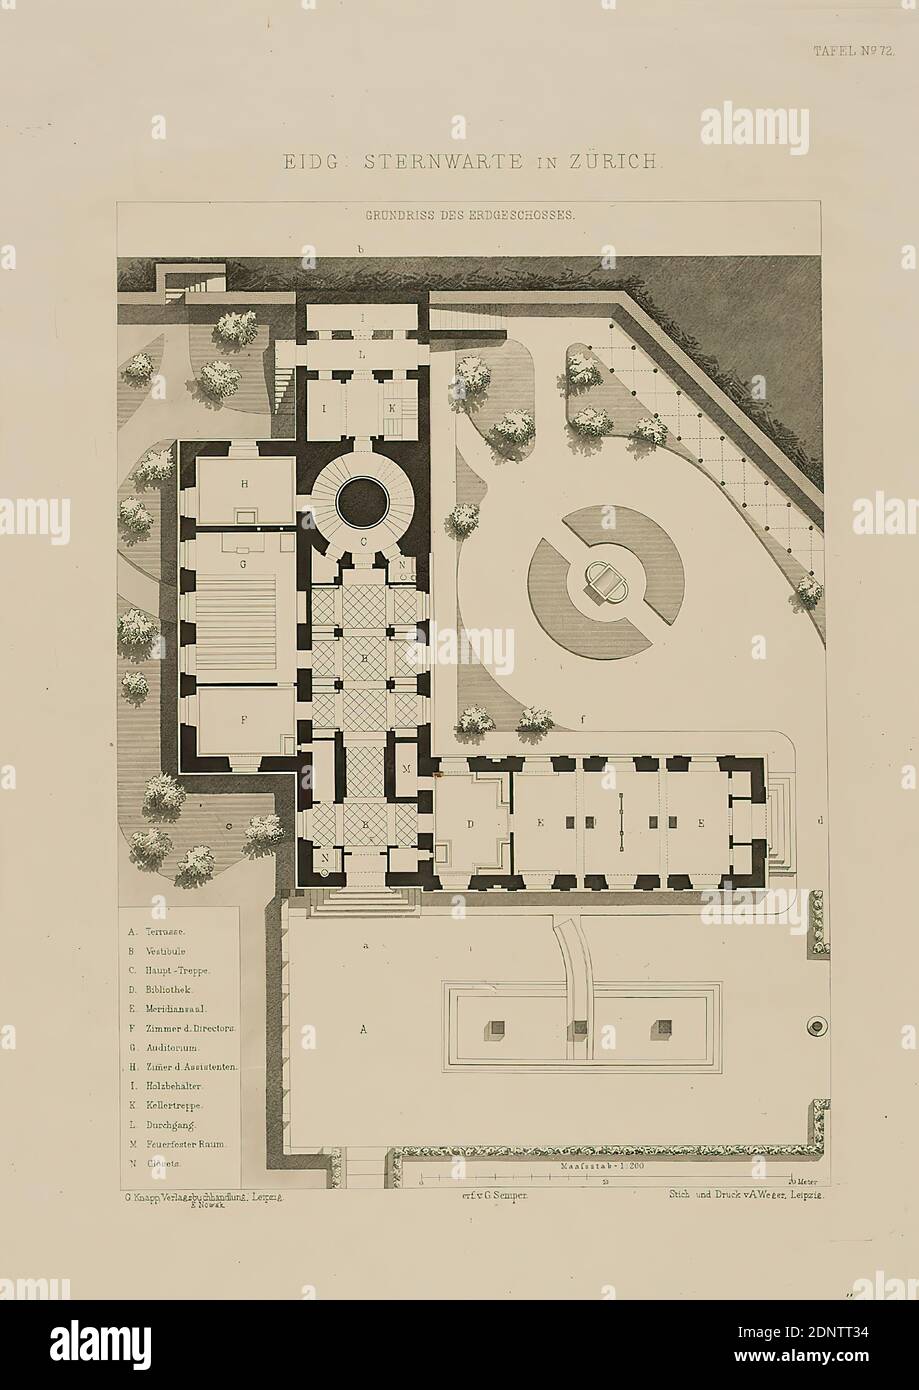 G. Knapp, Verlagsbuchhandlung Leipzig, August Weger, Gottfried Semper,  design for the Swiss Federal Observatory in Zurich. Floor plan of the first  floor, old stock, probably a 1903, paper, copperplate engraving, sheet size: